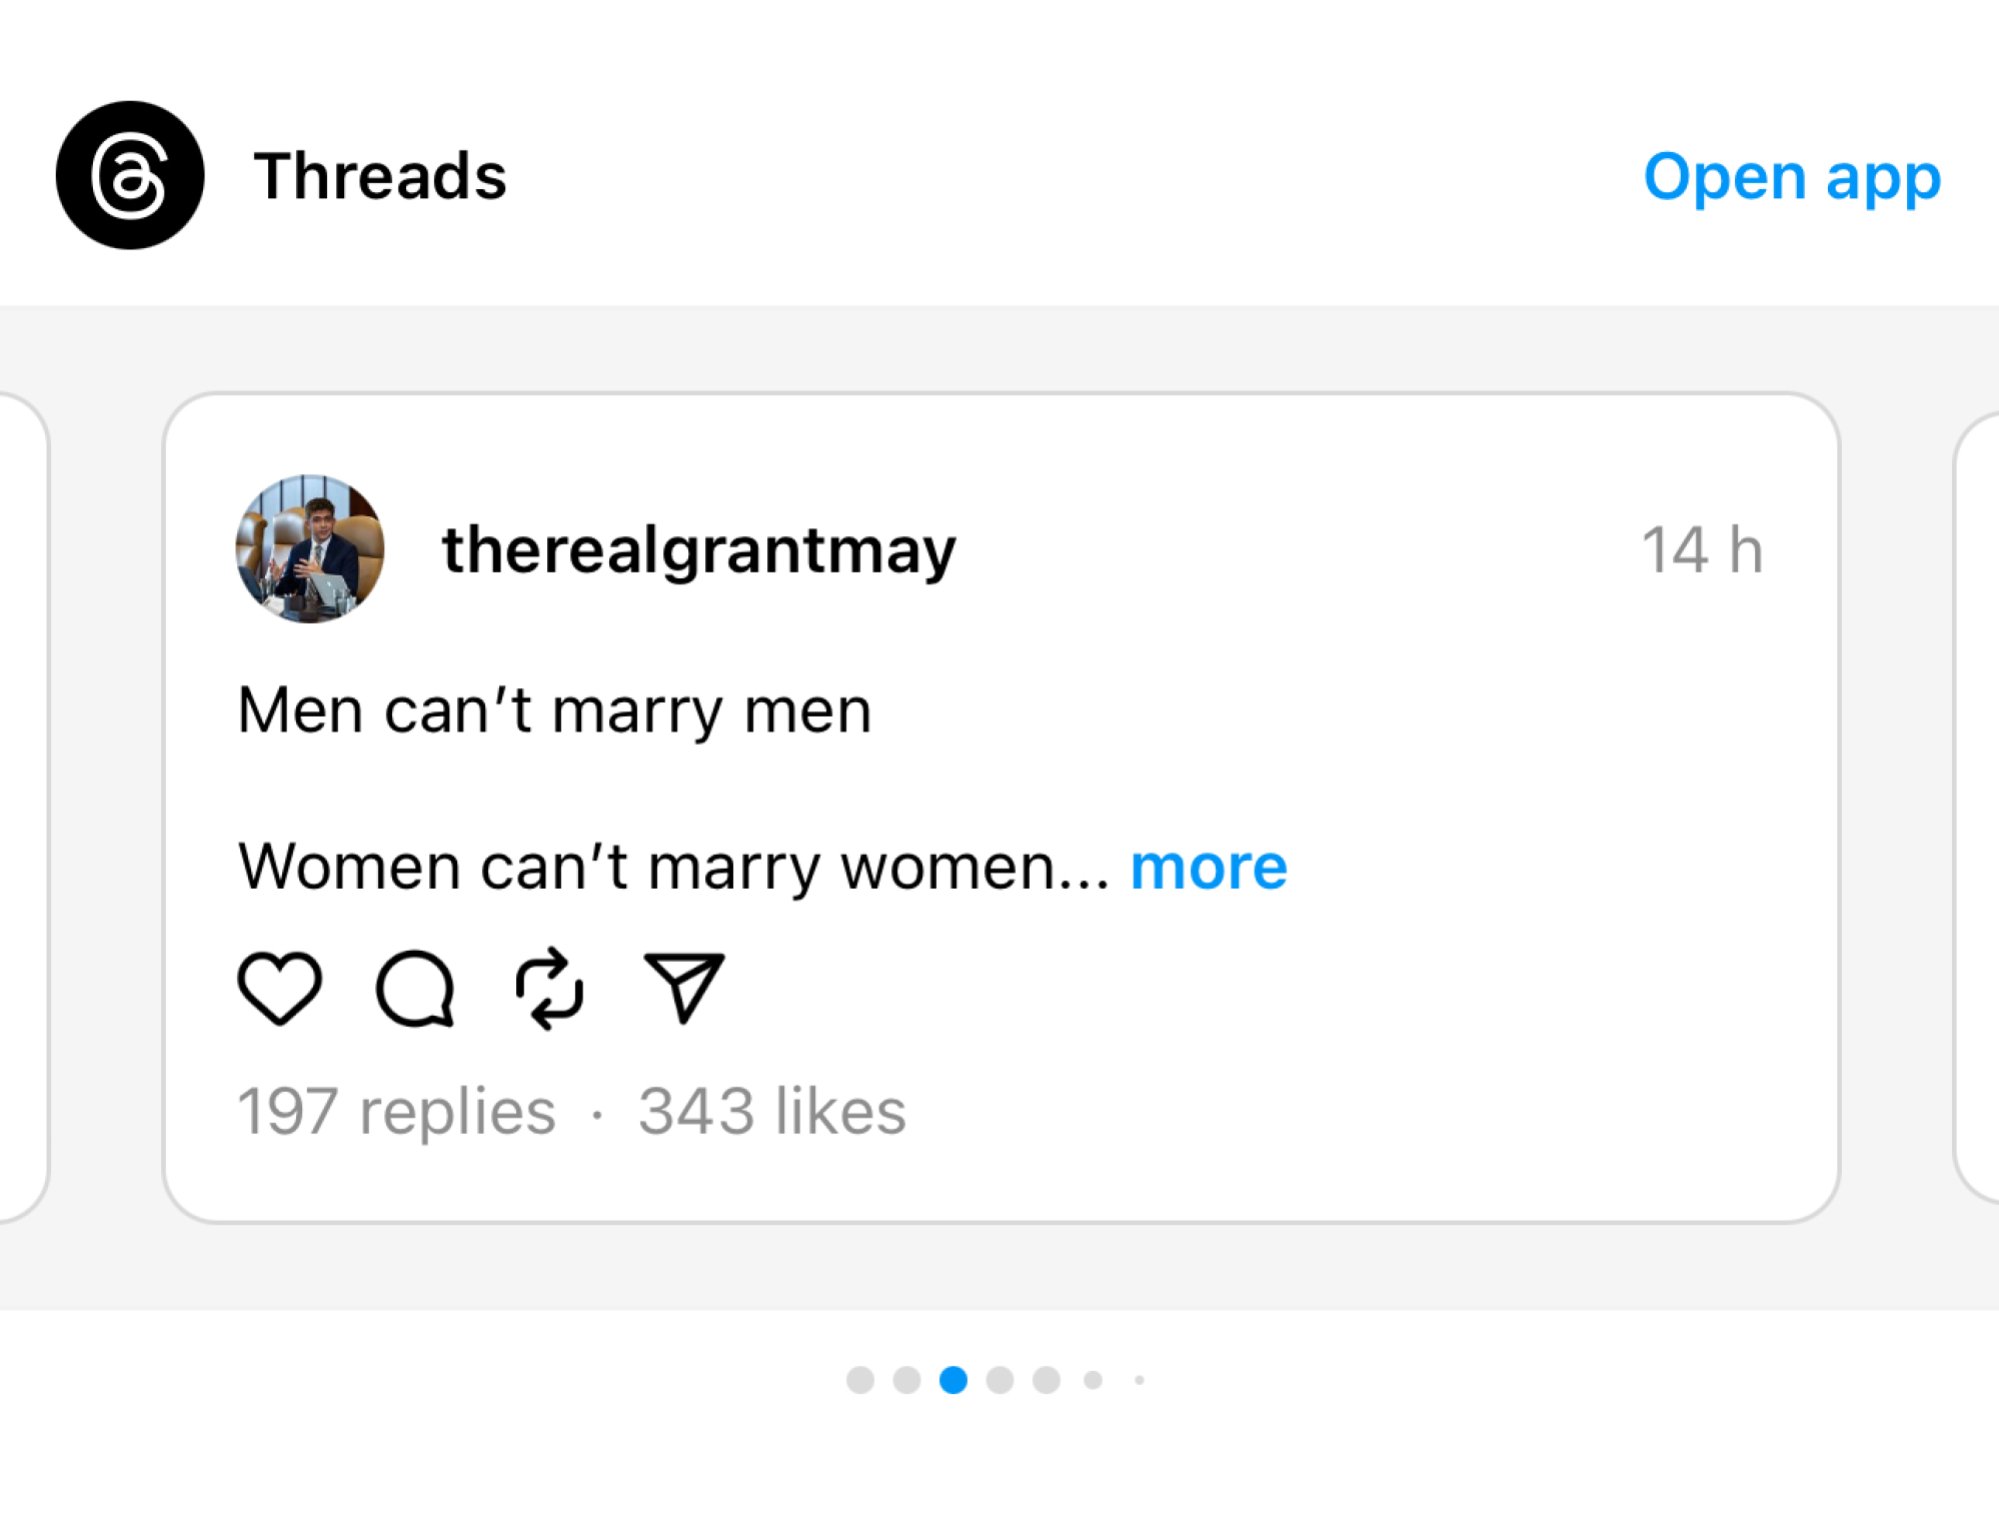 A screenshot of a suggested Threads posts on Instagram.